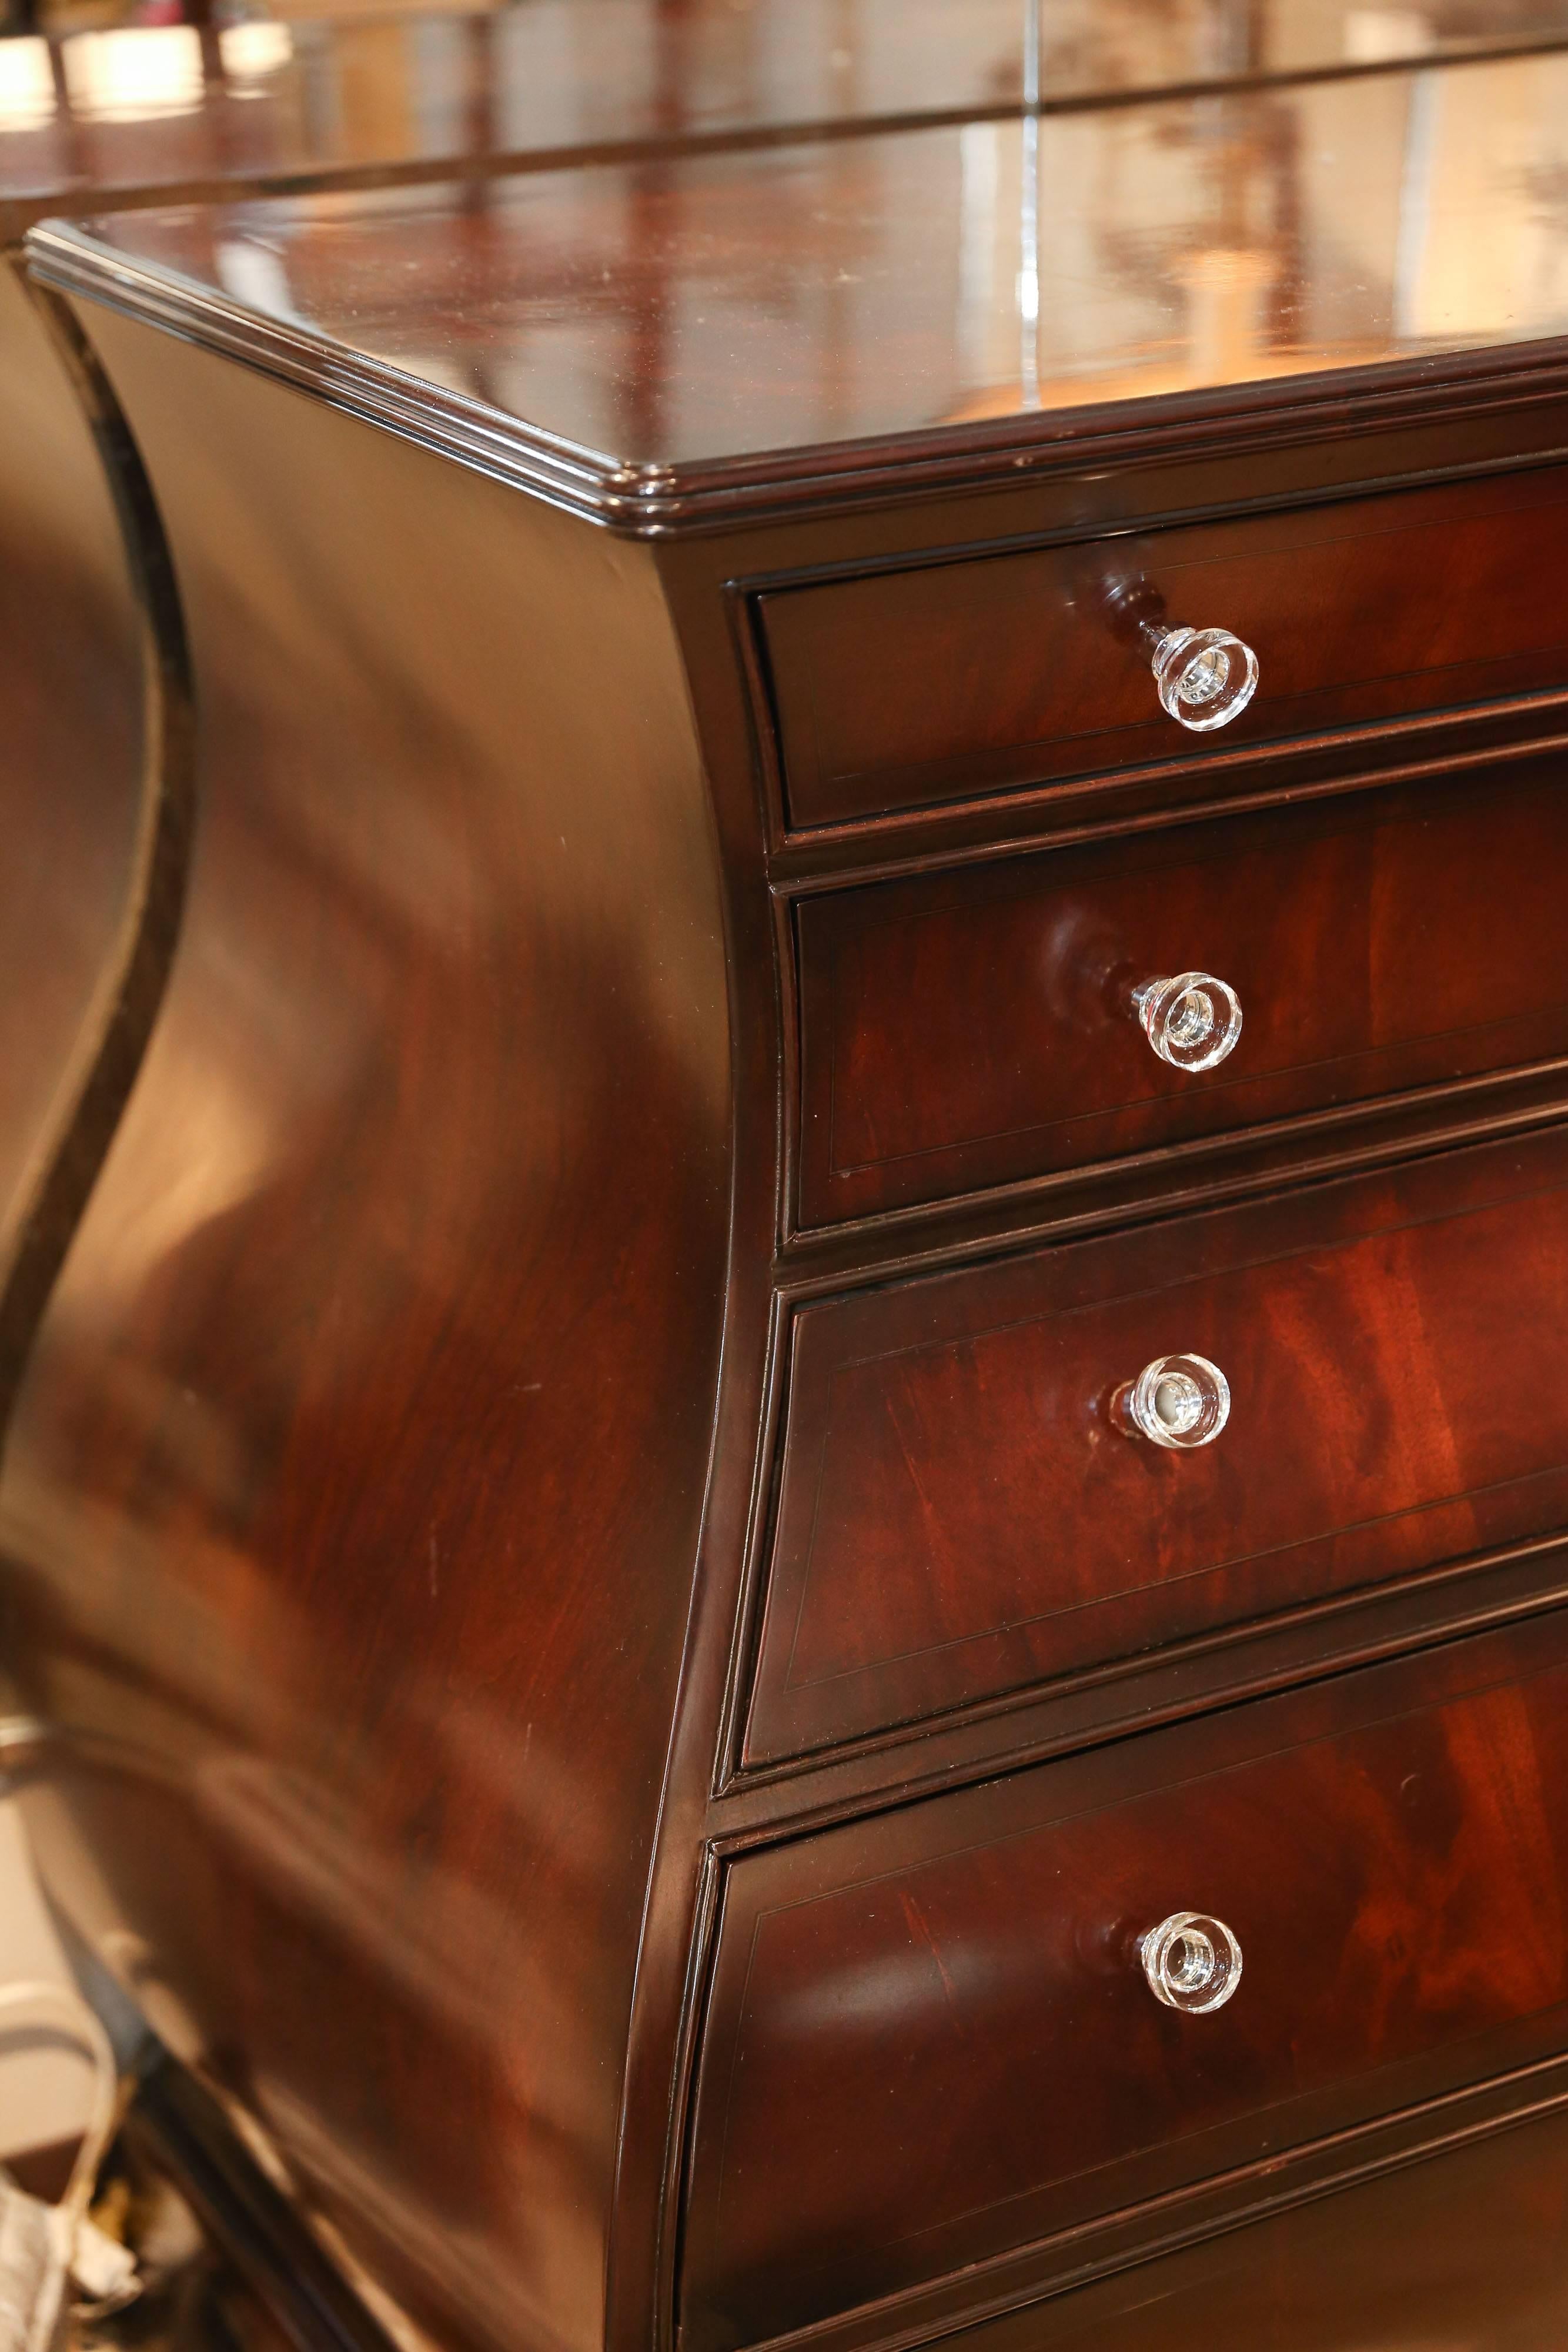 This beautiful bombe’ chest is from Pennsylvania House New Standards: The Steve Tyrell Collection that debuted in 2003. Just like the jazz singer the collection included traditional, time-tested standards, that evoked the classics with a new twist.